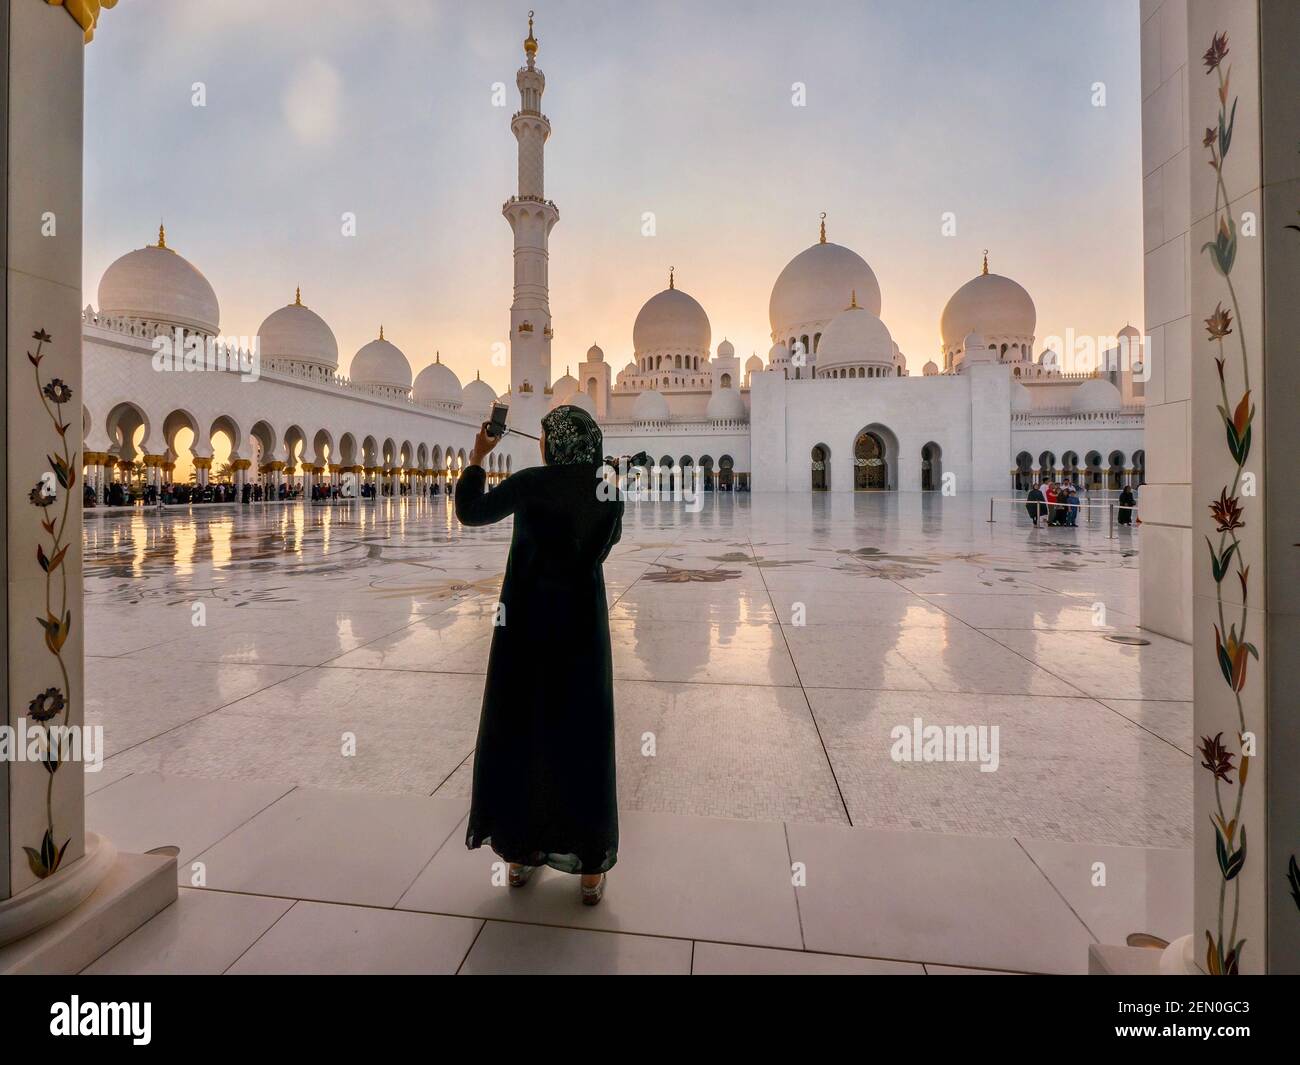 A young Muslim woman wearing a black abaya takes a selfie at a very beautiful mosque at sunset in Abu Dhabi, UAE. Stock Photo